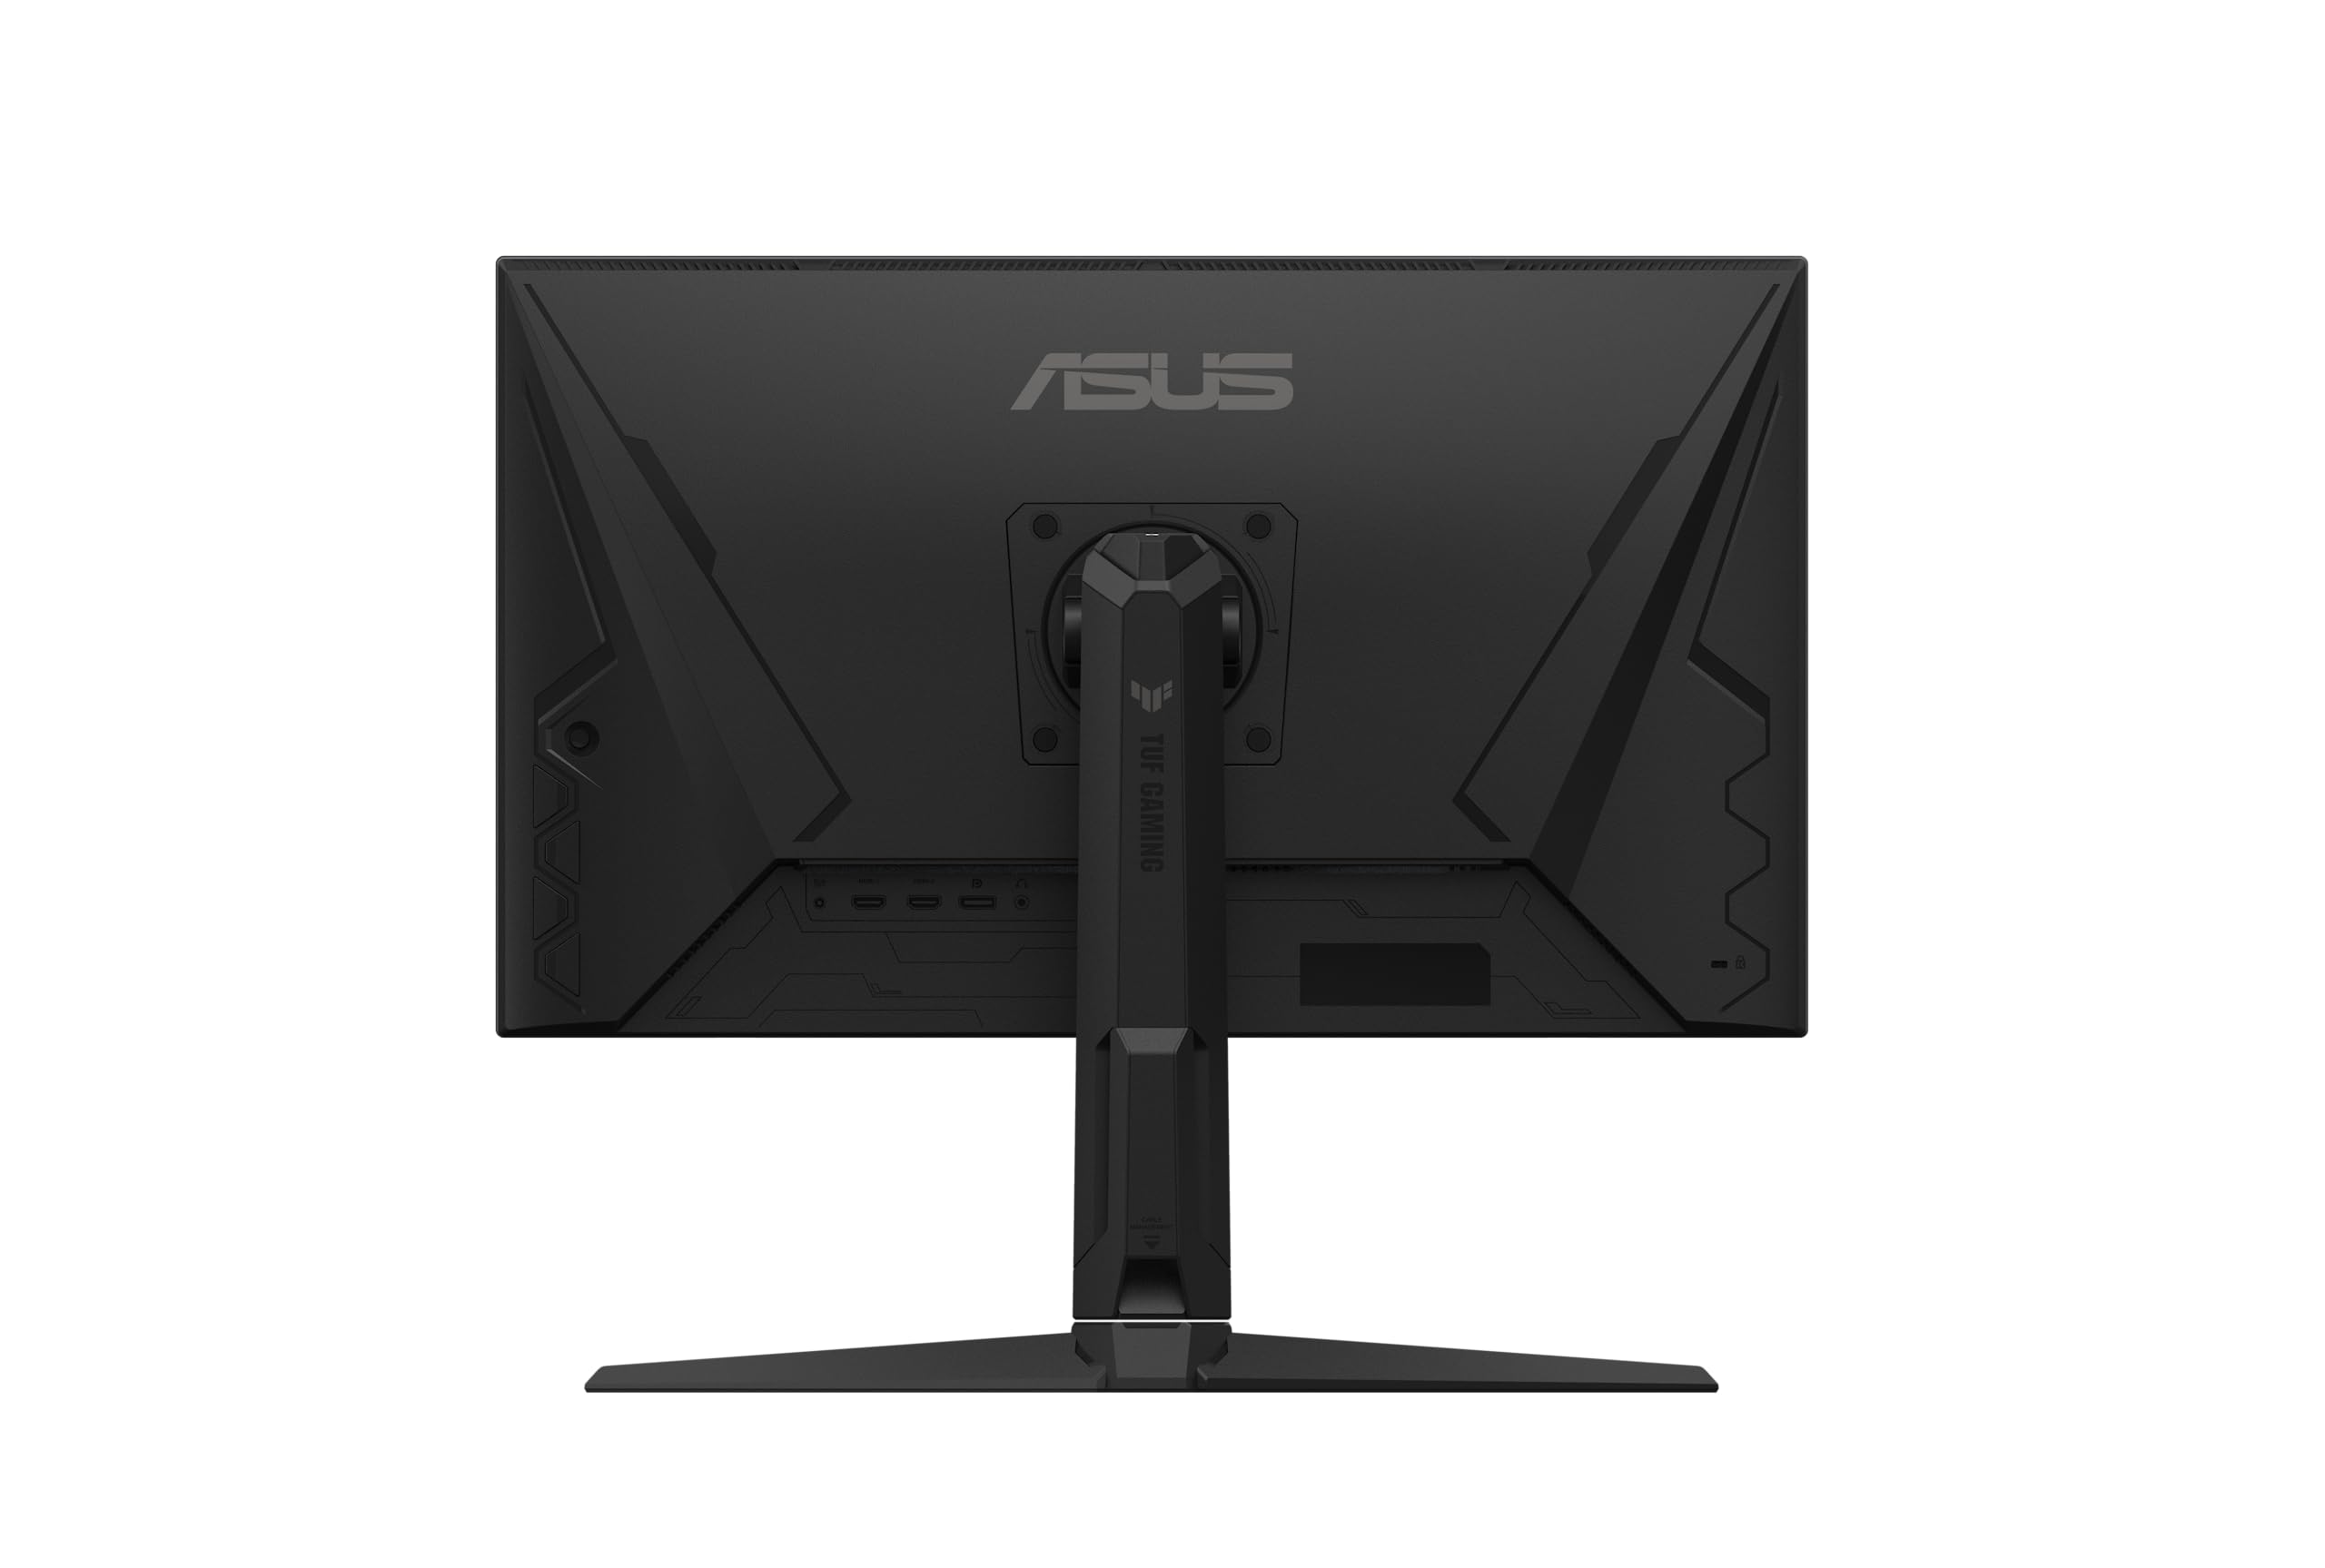 ASUS TUF Gaming 27” 1440P Gaming Monitor (VG27AQML1A) - QHD (2560 x 1440), 260Hz, 1ms, Fast IPS, Extreme Low Motion Blur Sync, G-SYNC Compatible, Freesync Premium, Variable Overdrive, DisplayHDR™ 400